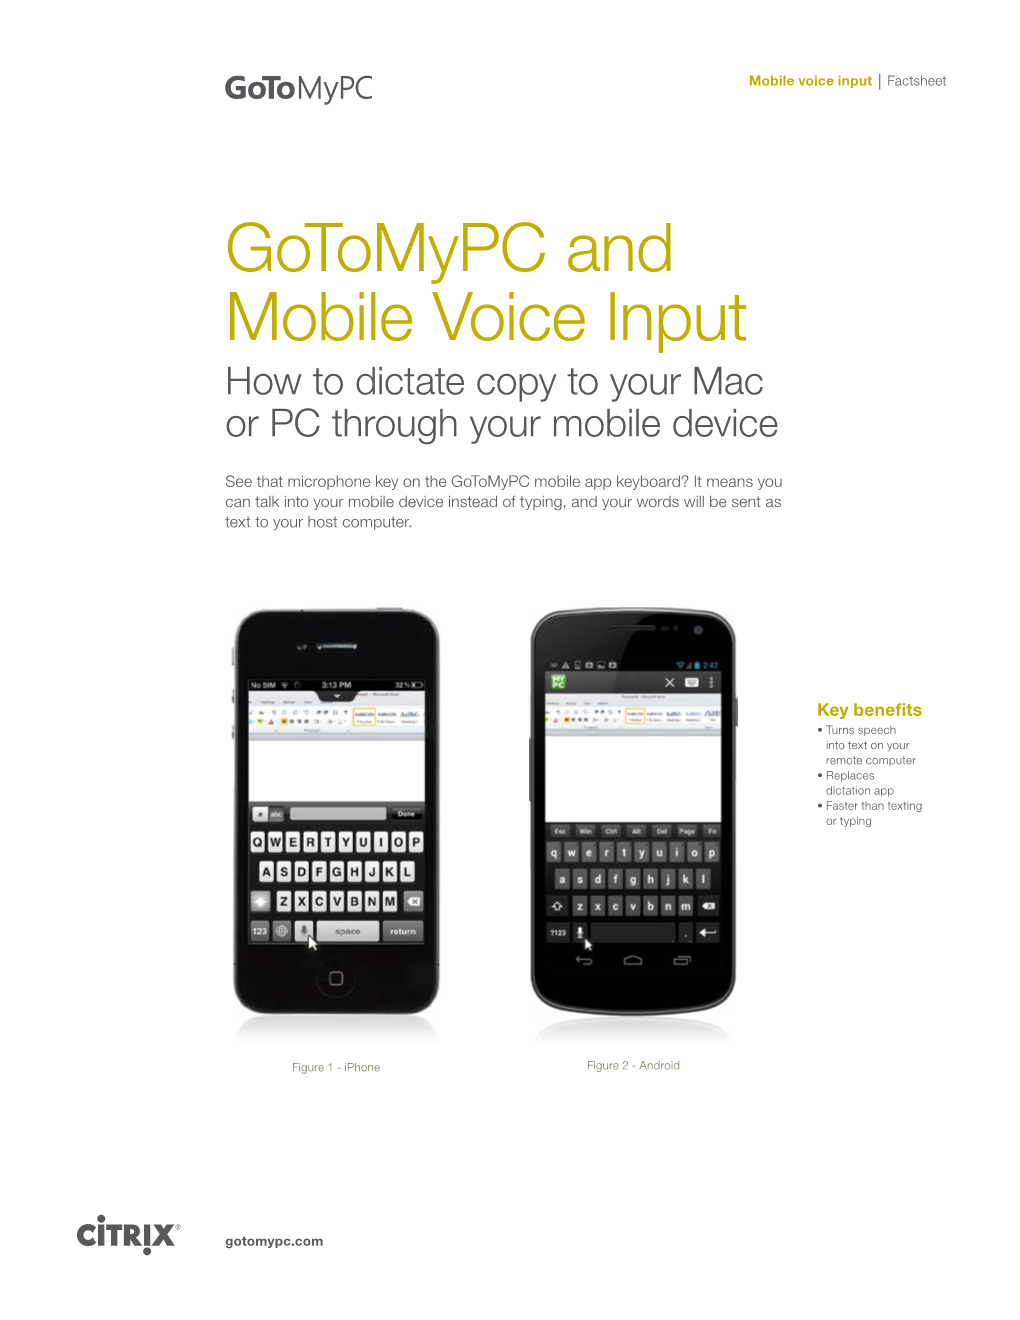 Gotomypc and Mobile Voice Input How to Dictate Copy to Your Mac Or PC Through Your Mobile Device